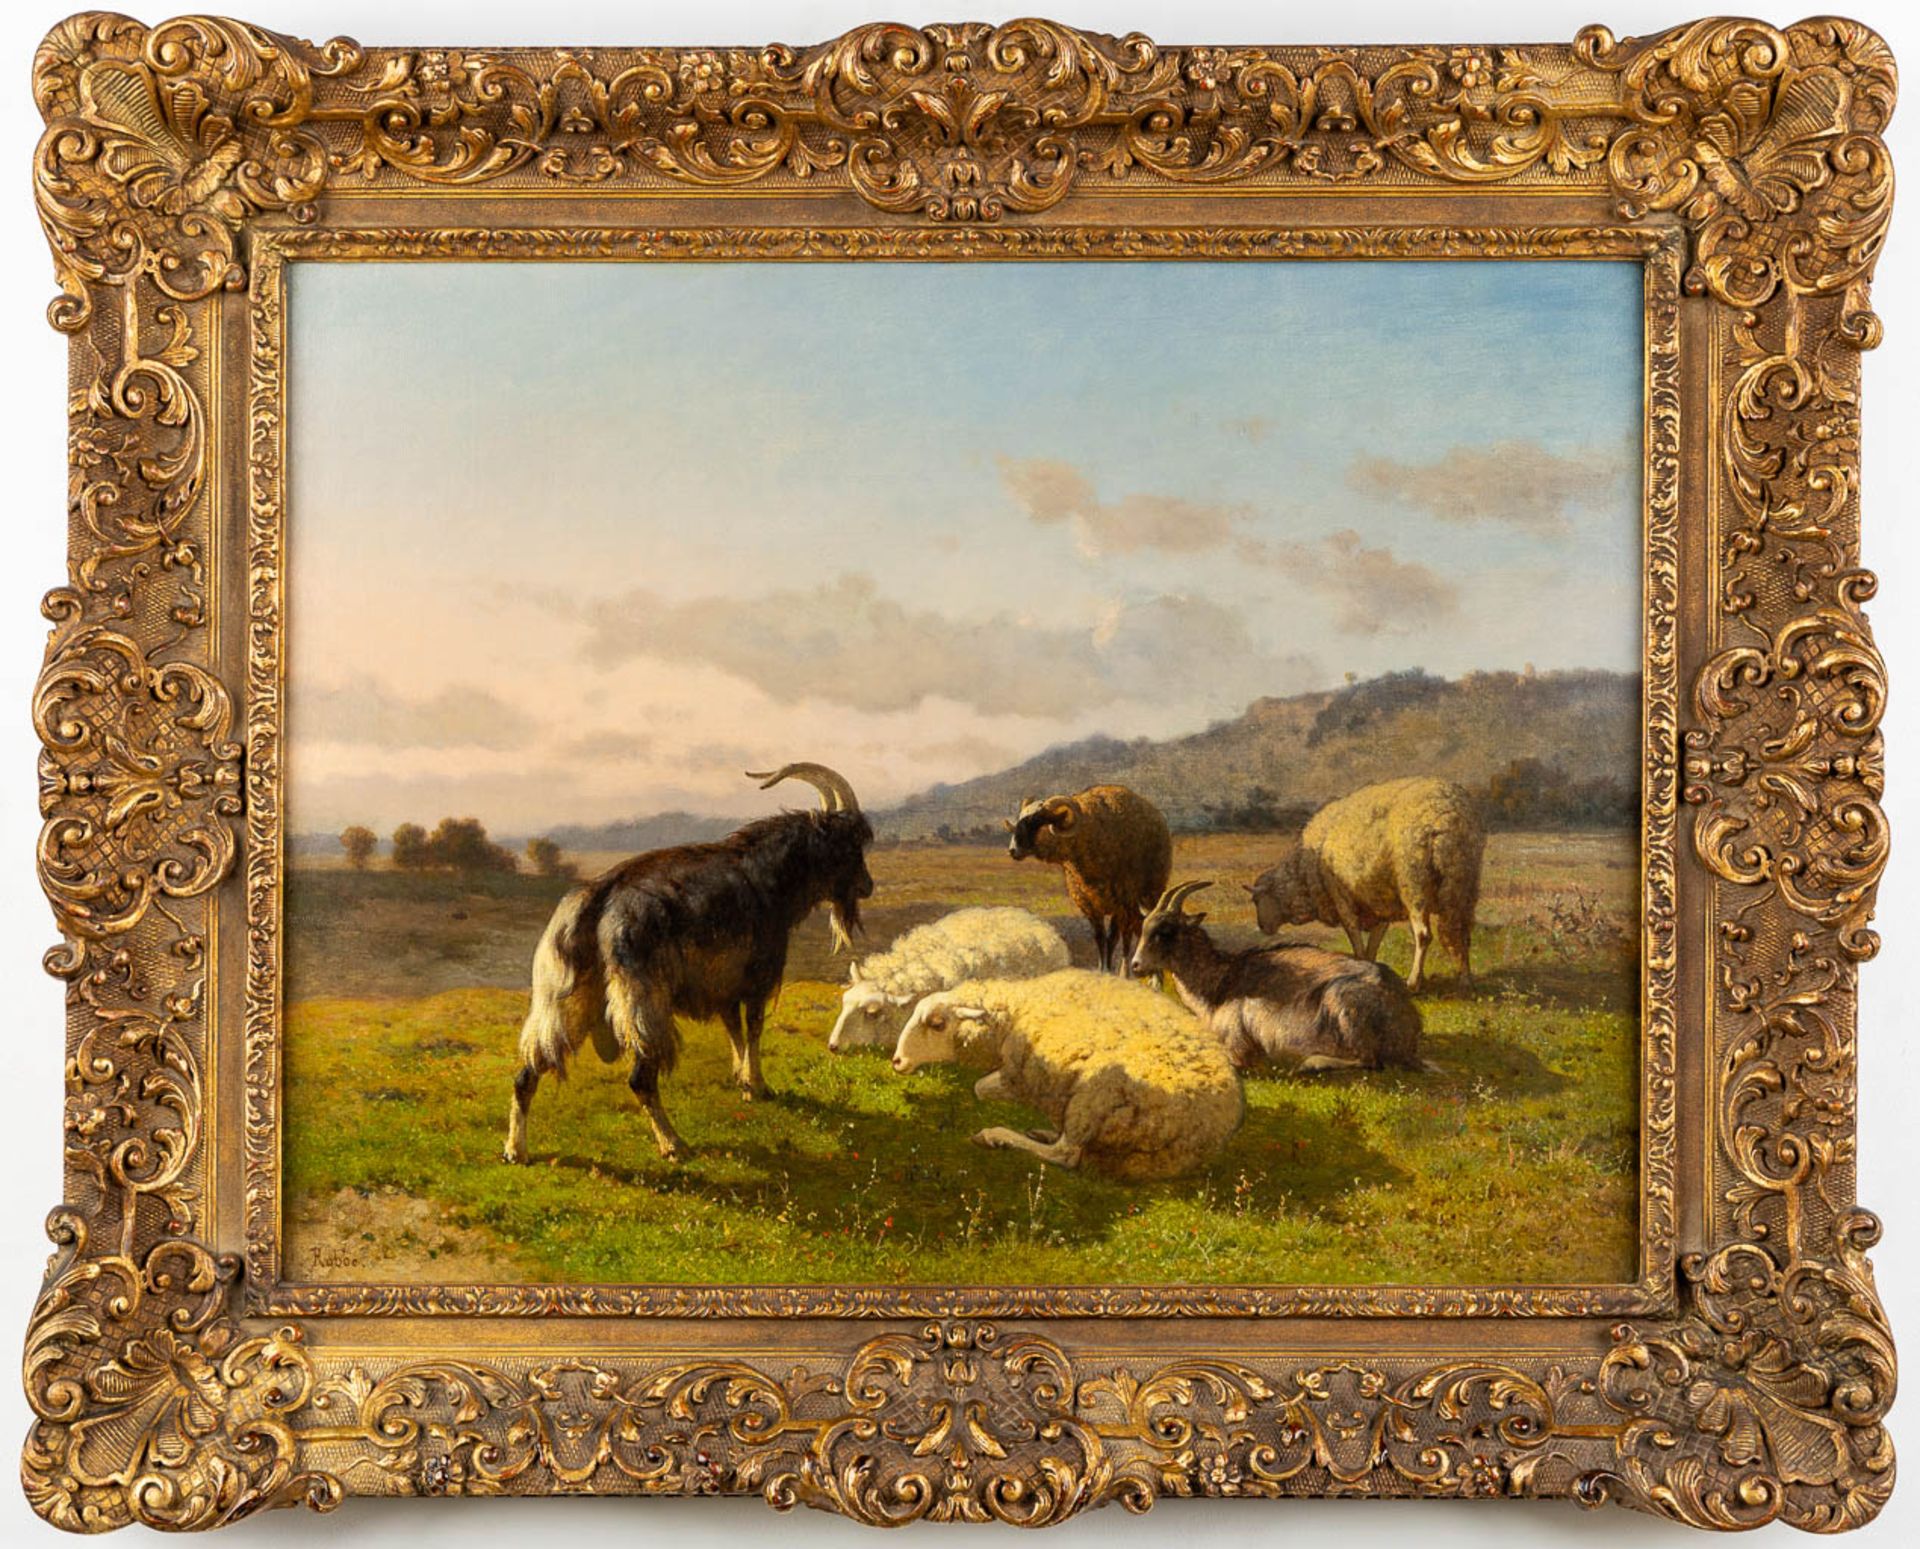 Louis ROBBE (1806-1887) 'Sheep and Rams' oil on canvas. (W:76 x H:57 cm) - Image 3 of 7